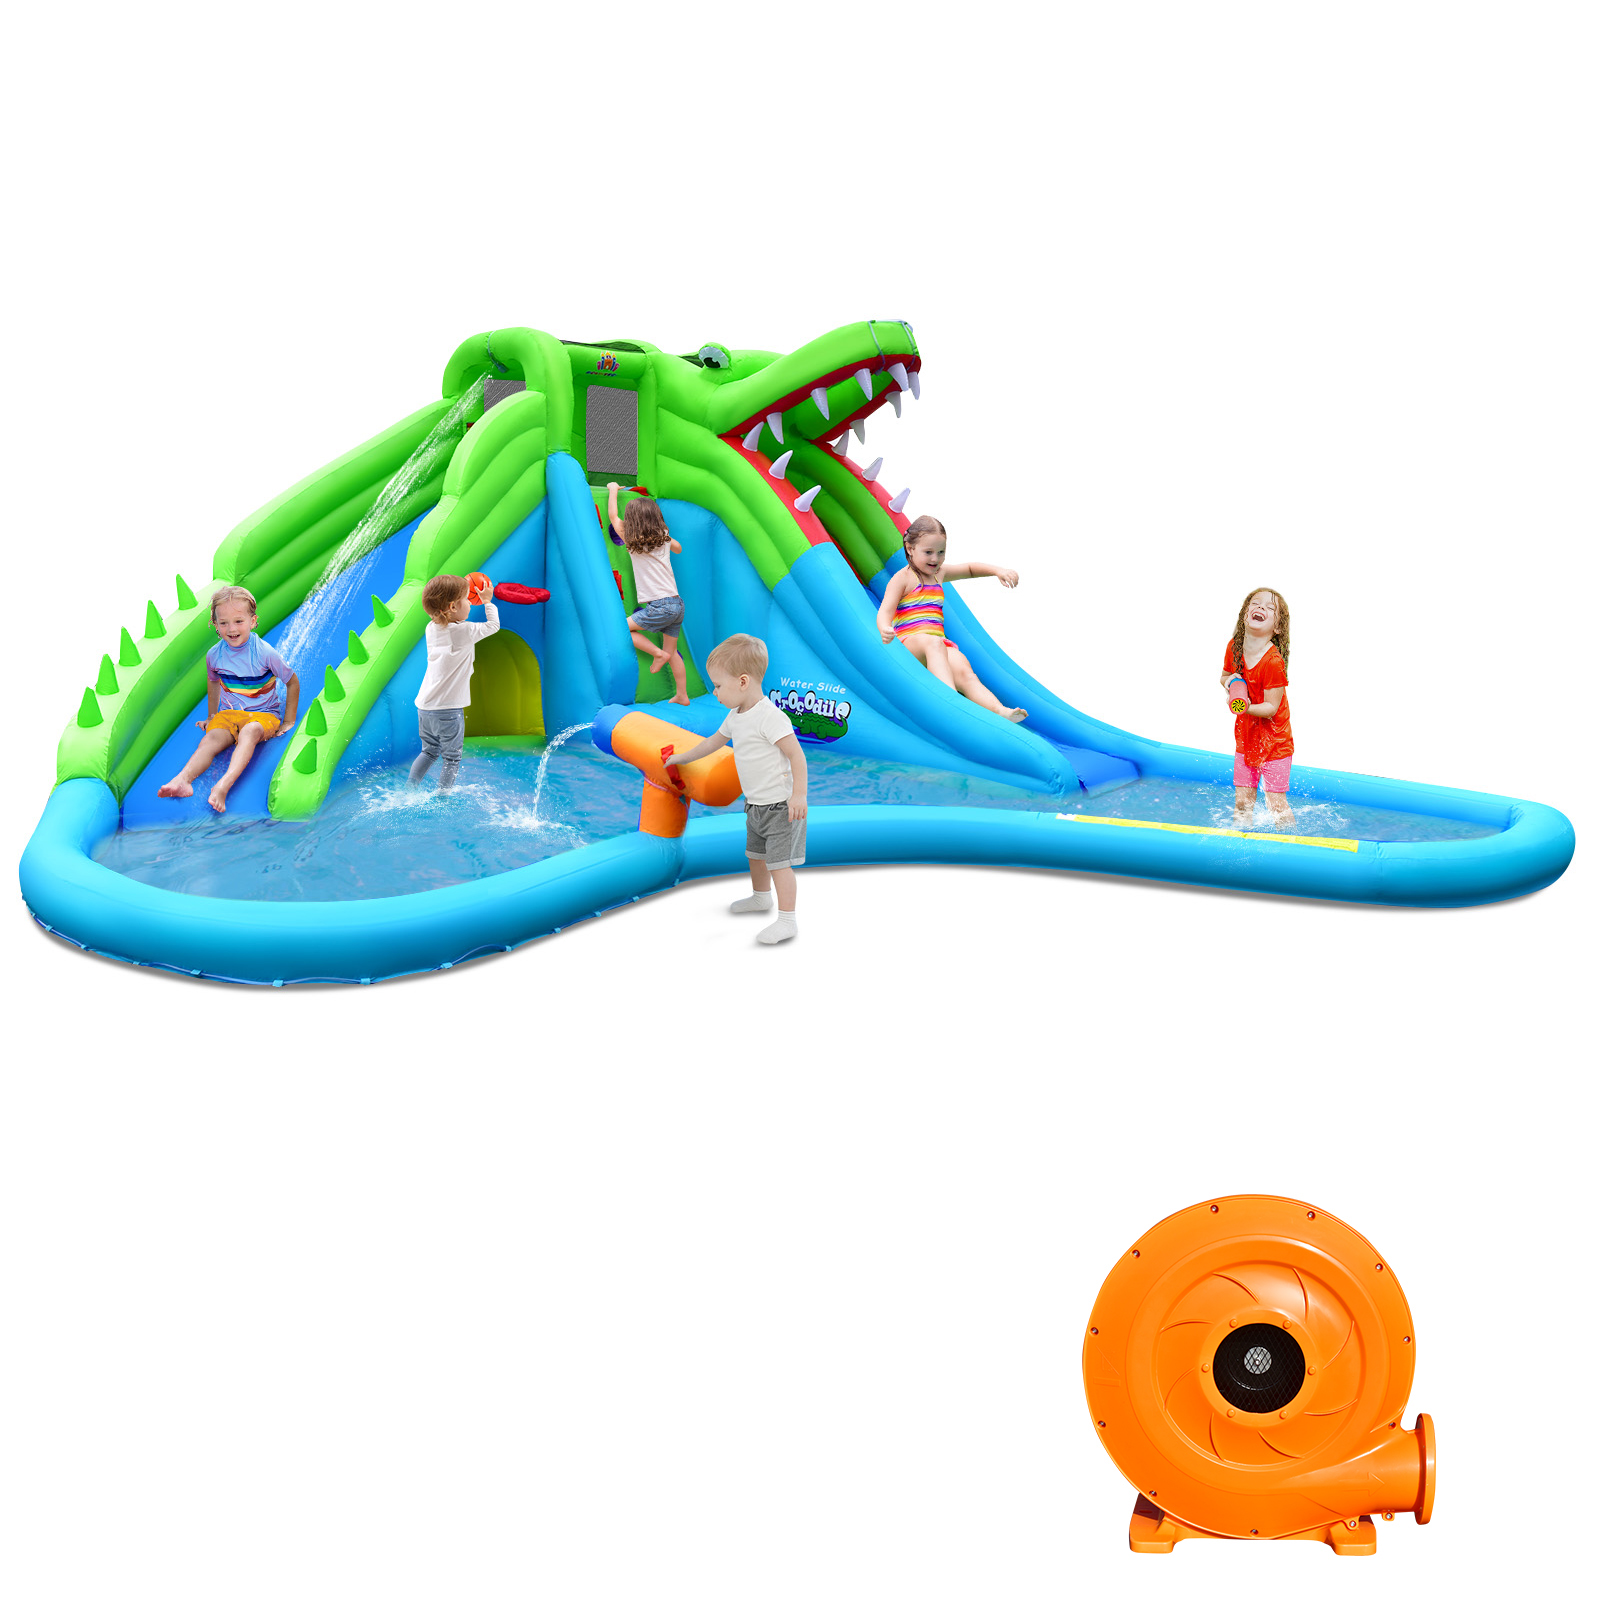 Giant 7 In 1 Inflatable Bounce House with 780W Air Blower